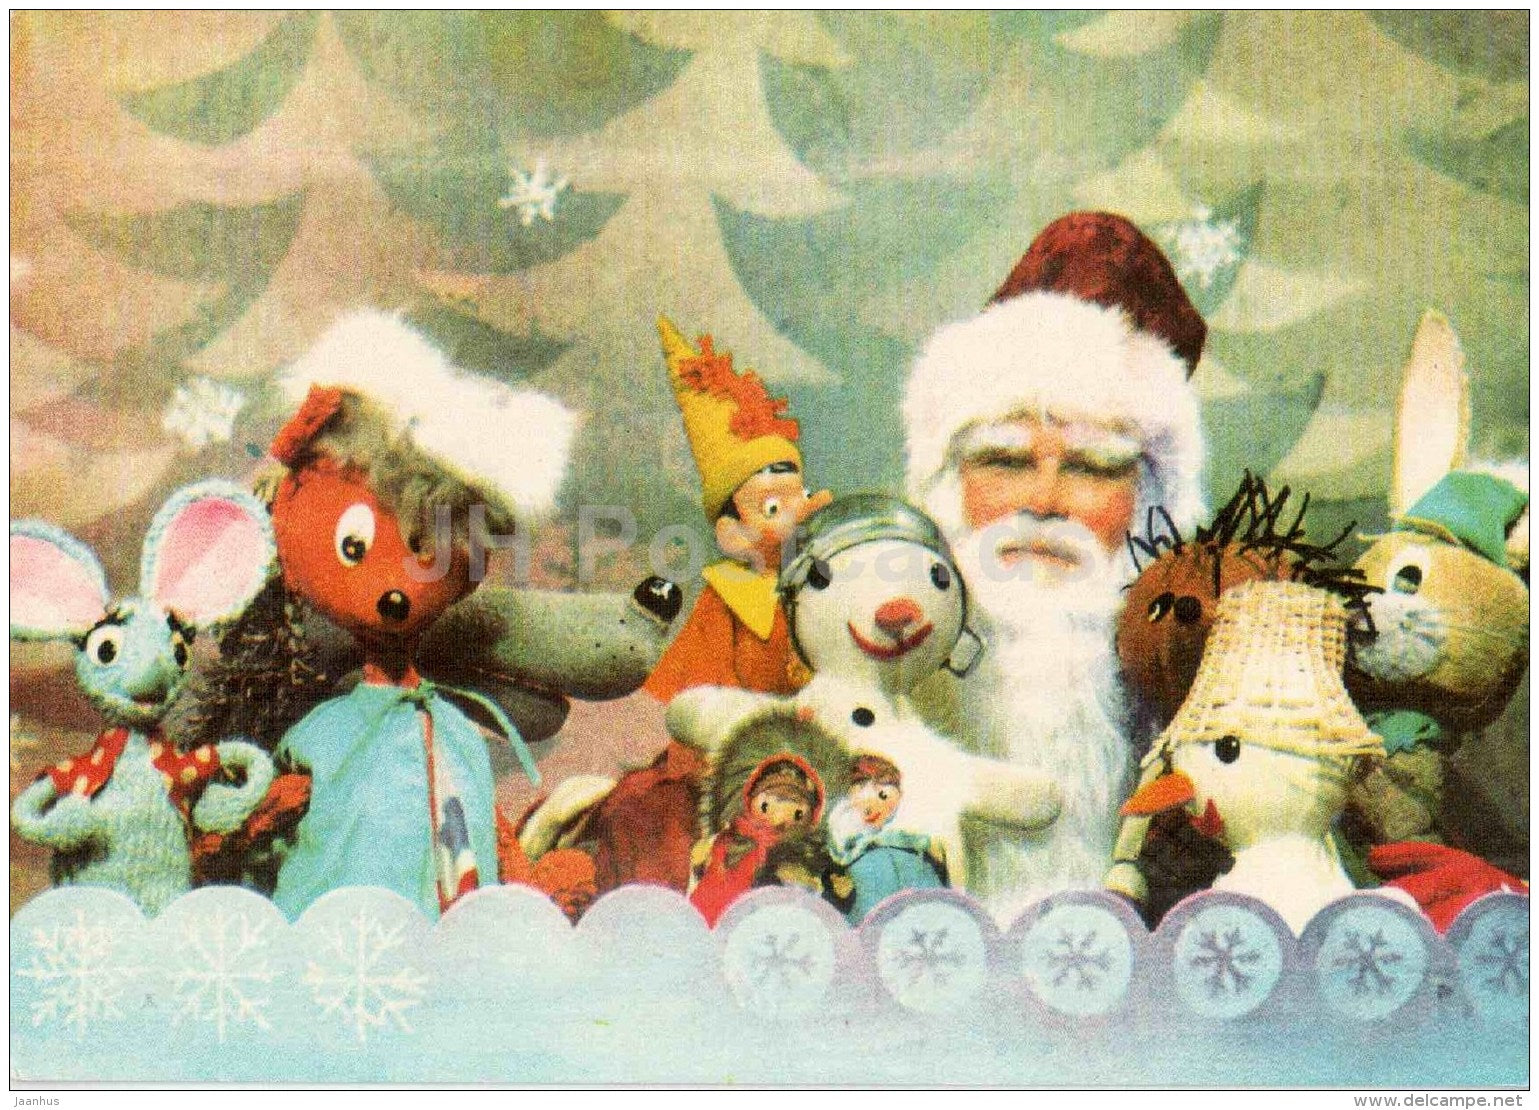 New Year Greeting card - puppetry - hare - mouse - snowman - Pinocchio - Santa Claus - 1979 - Estonia USSR - used - JH Postcards